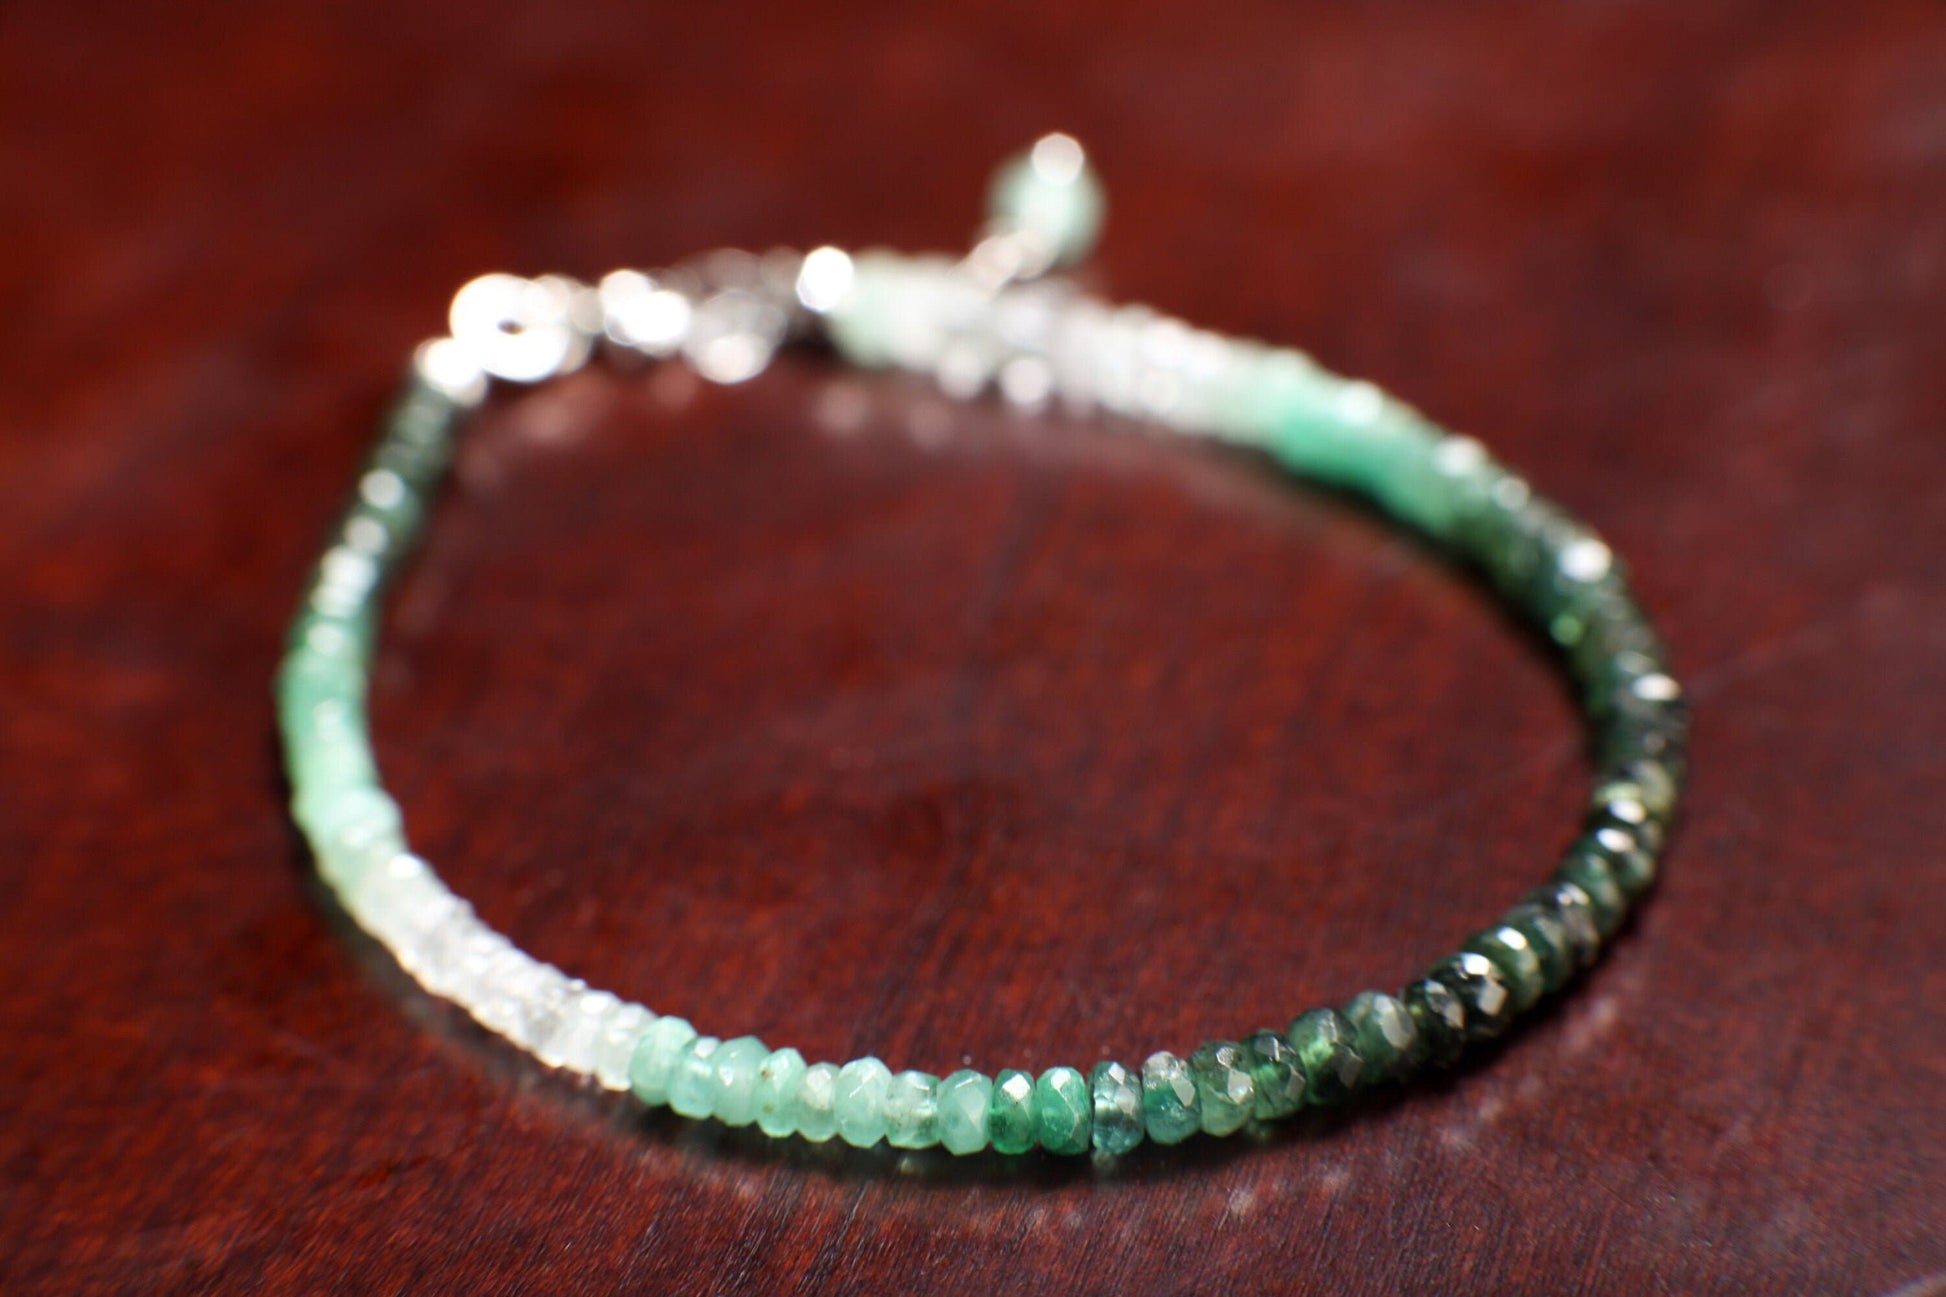 Ombre Emerald Faceted Rondelle 3-4mm Bracelet in 925 Sterling Silver Clasp and 1&quot; Extension Chain,AAA Quality Natural Precious gift for her.